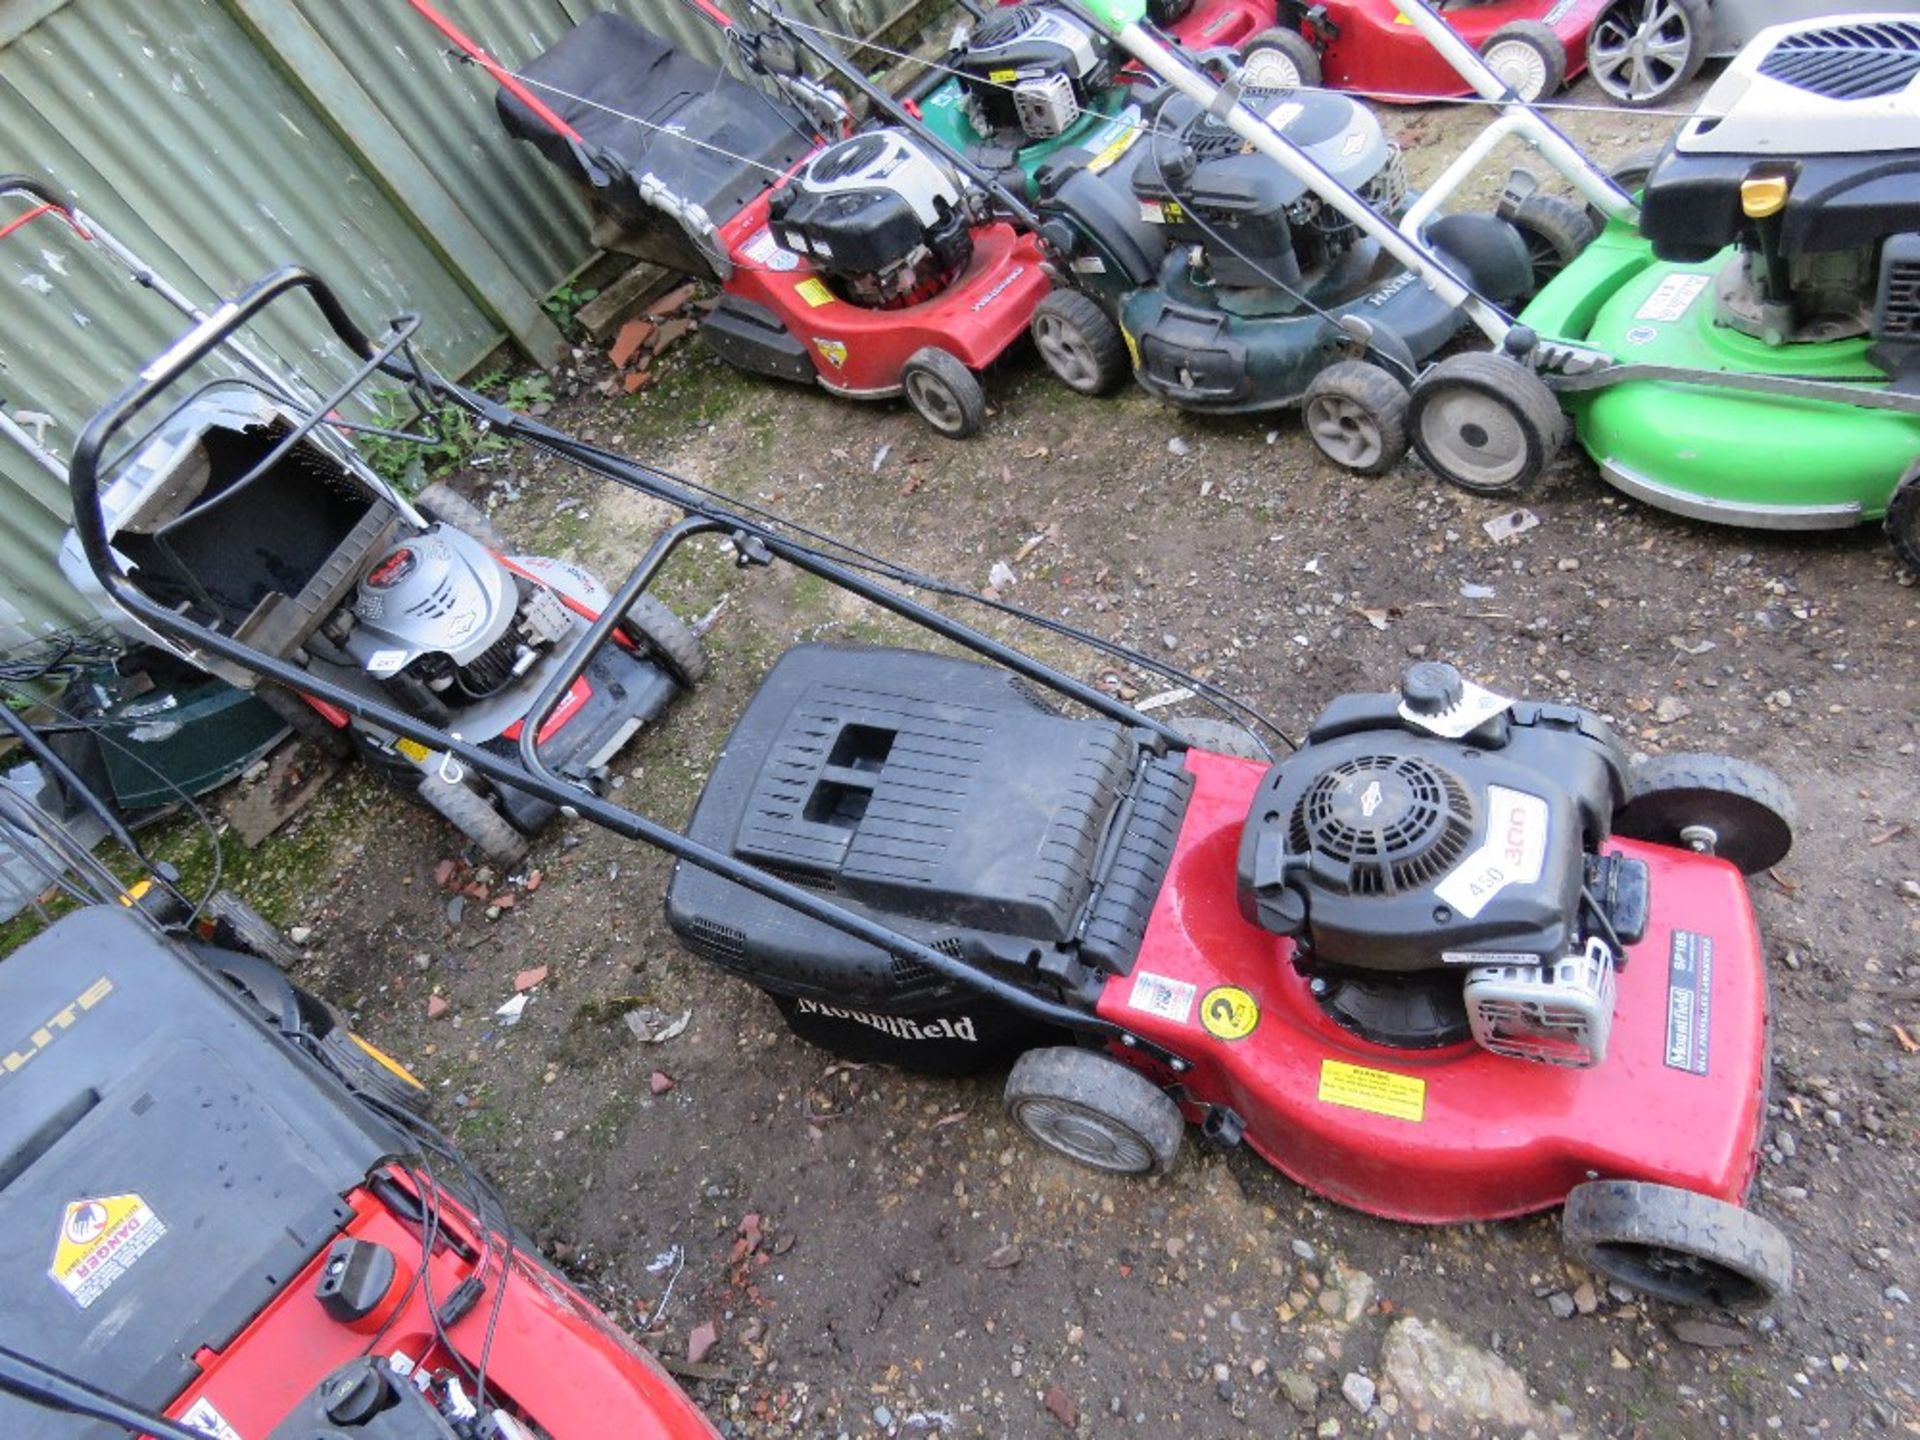 MOUNTFIELD PETROL ENGINED ROTARY LAWNMOWER. WITH COLLECTOR. THIS LOT IS SOLD UNDER THE AUCTIONEE